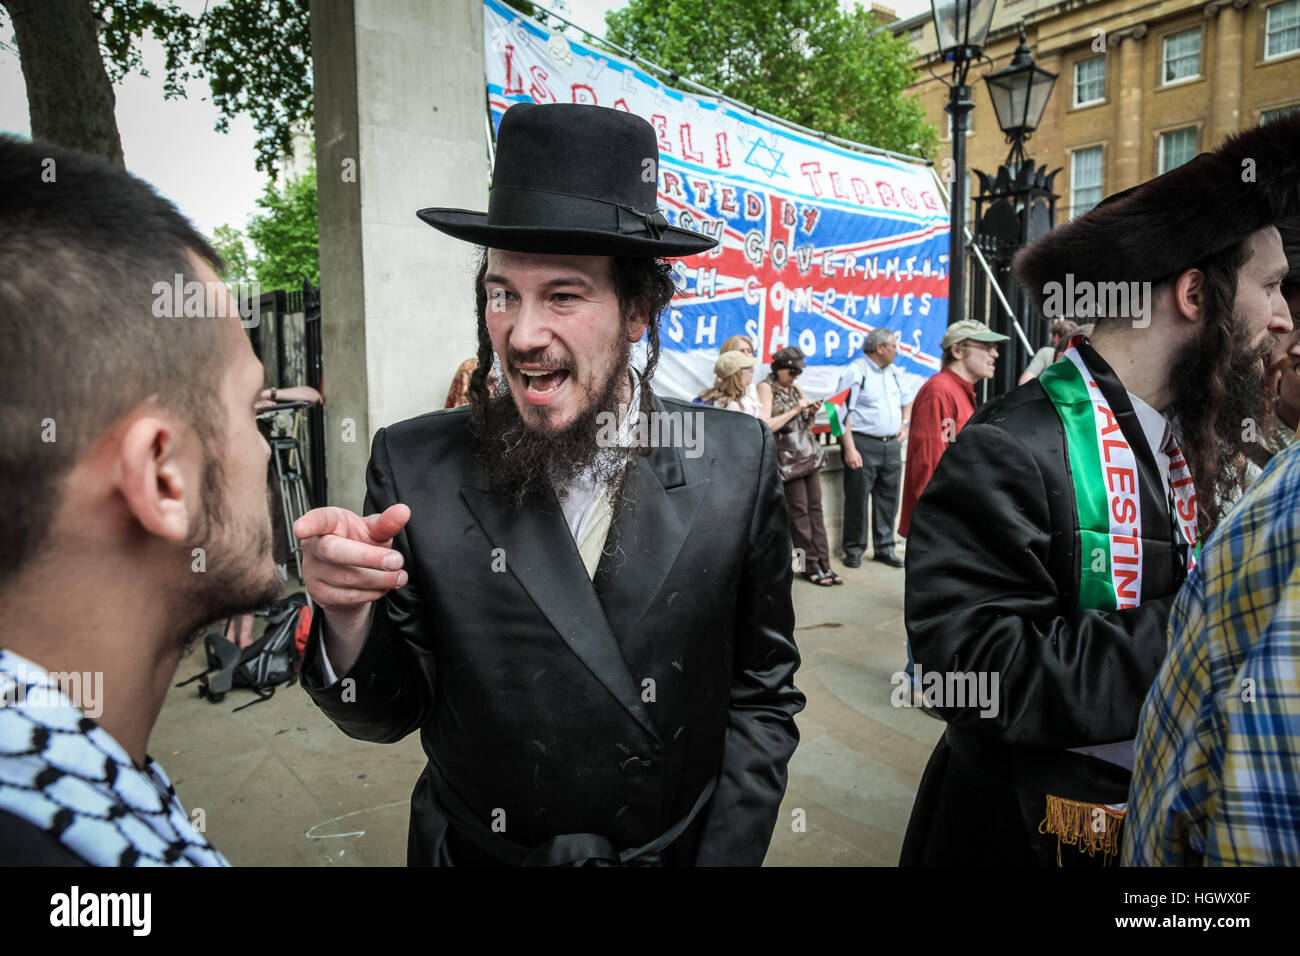 Jews Against Zionism. Protest march against the violence used by Israeli soldiers during the Gaza Flotilla Killings. London, UK. Stock Photo